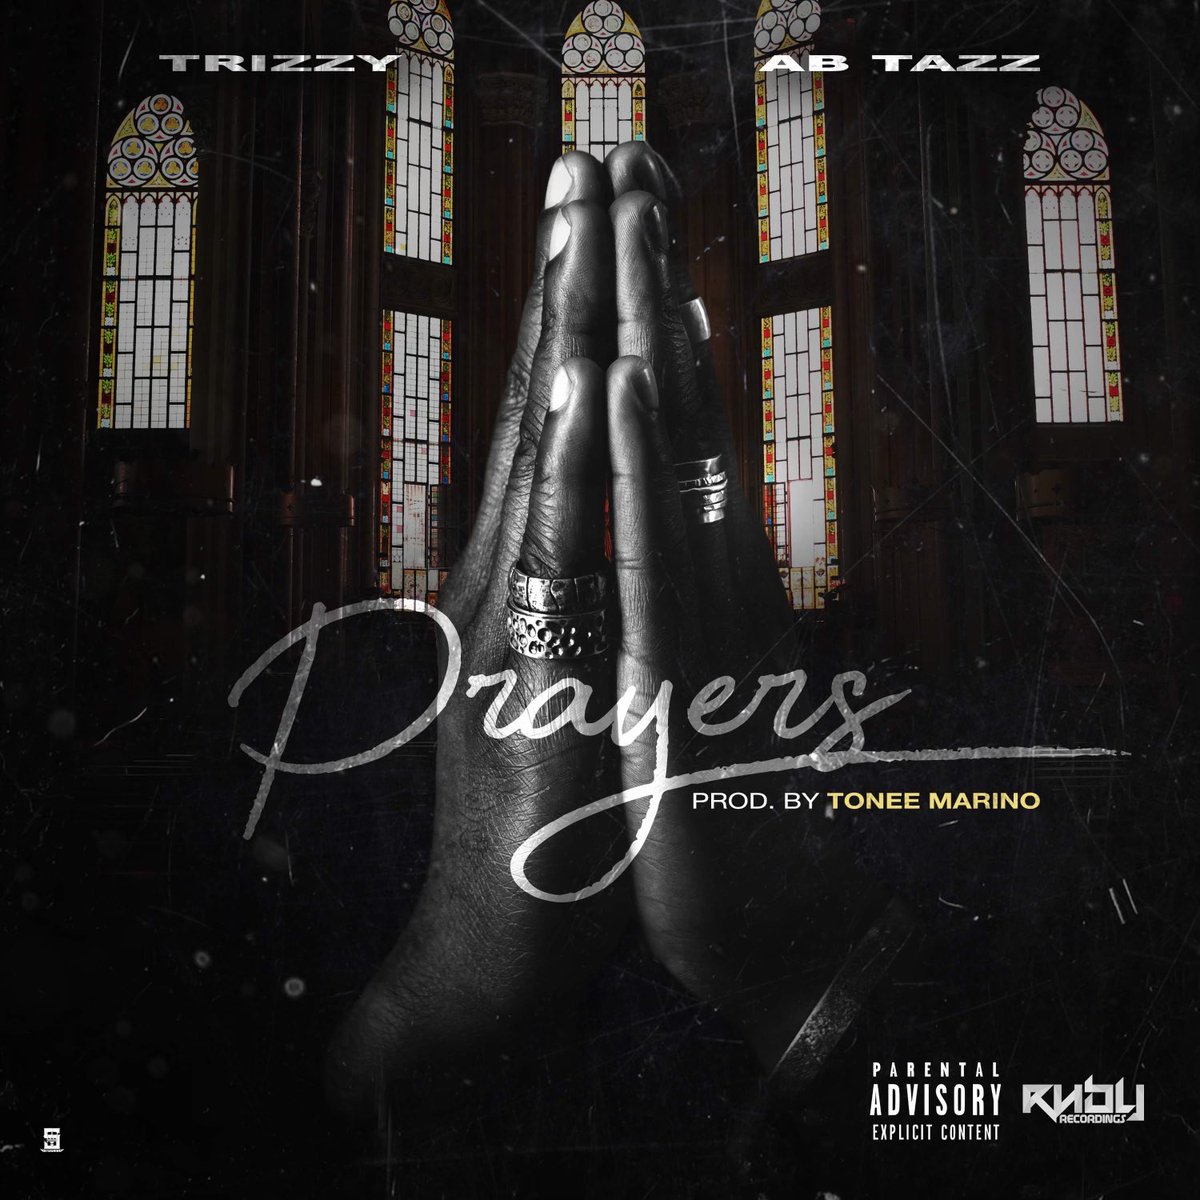 Me & my brother @ABTazz “Prayers” prod. @ToneeMarino May 15th Pre save now orcd.co/prayers